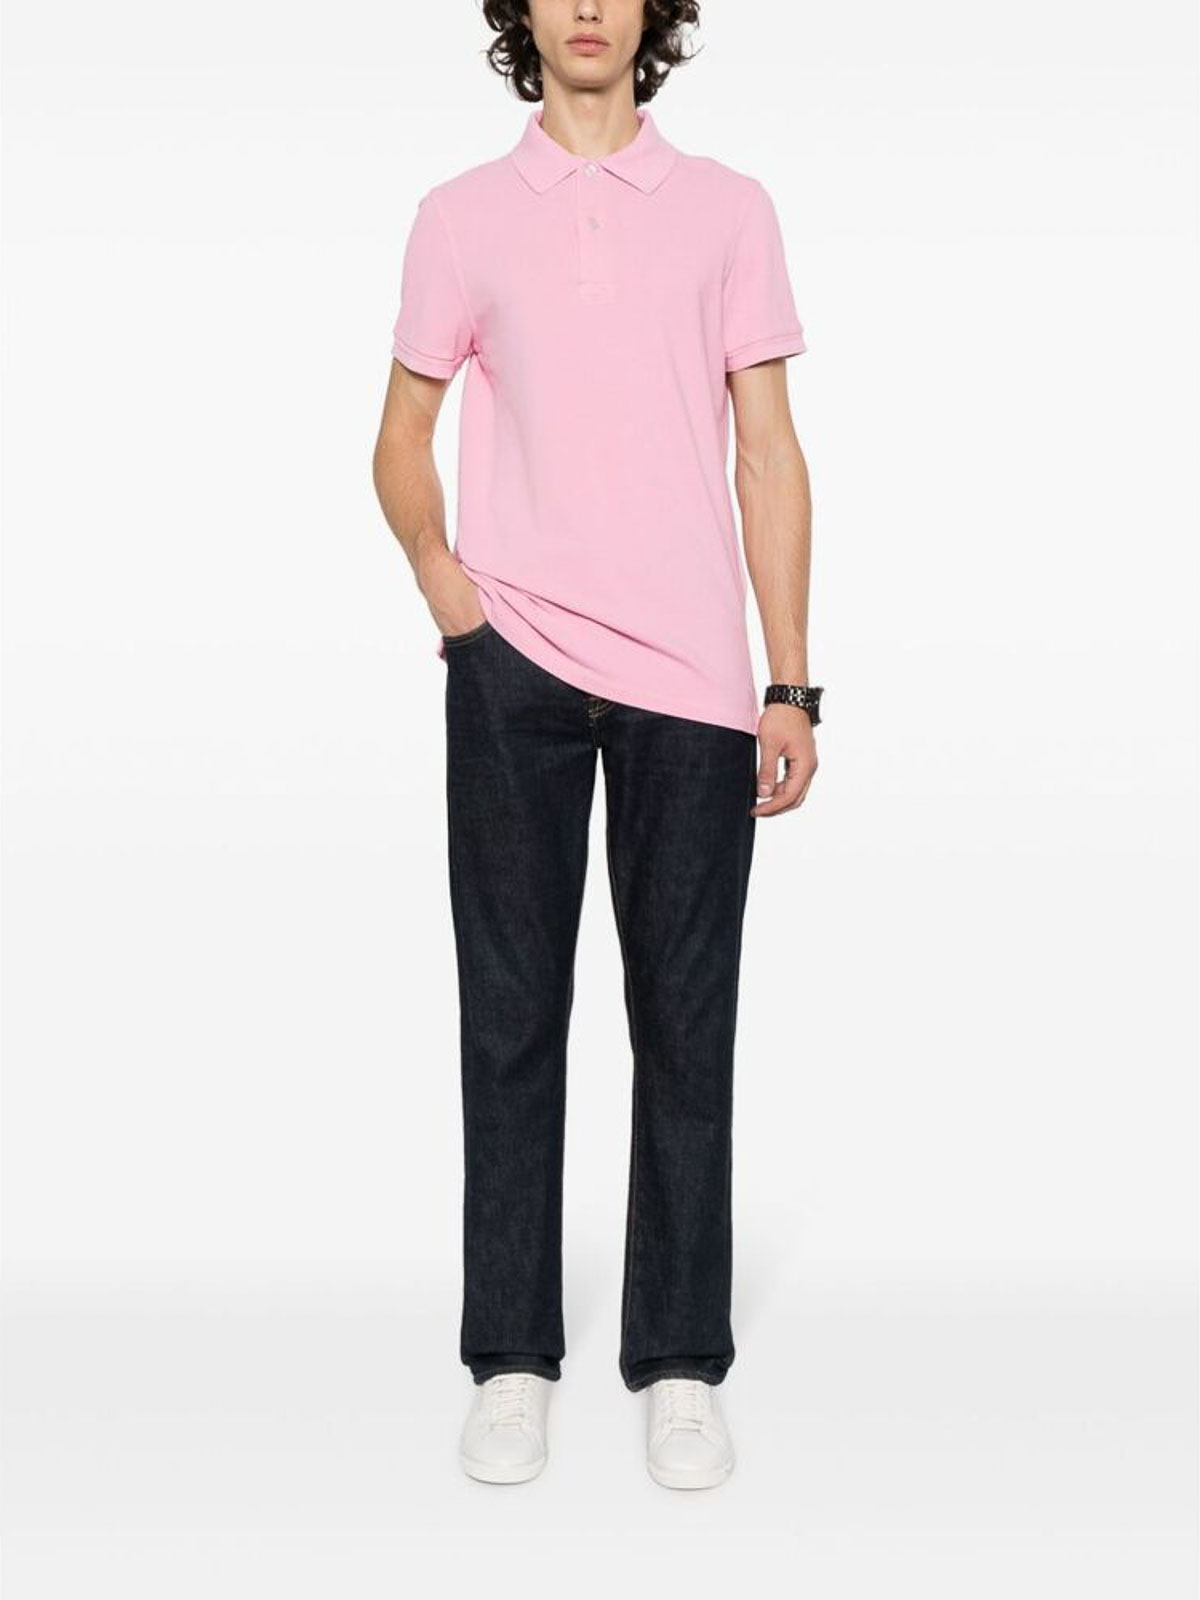 Shop Tom Ford Polo - Color Carne Y Neutral In Nude & Neutrals